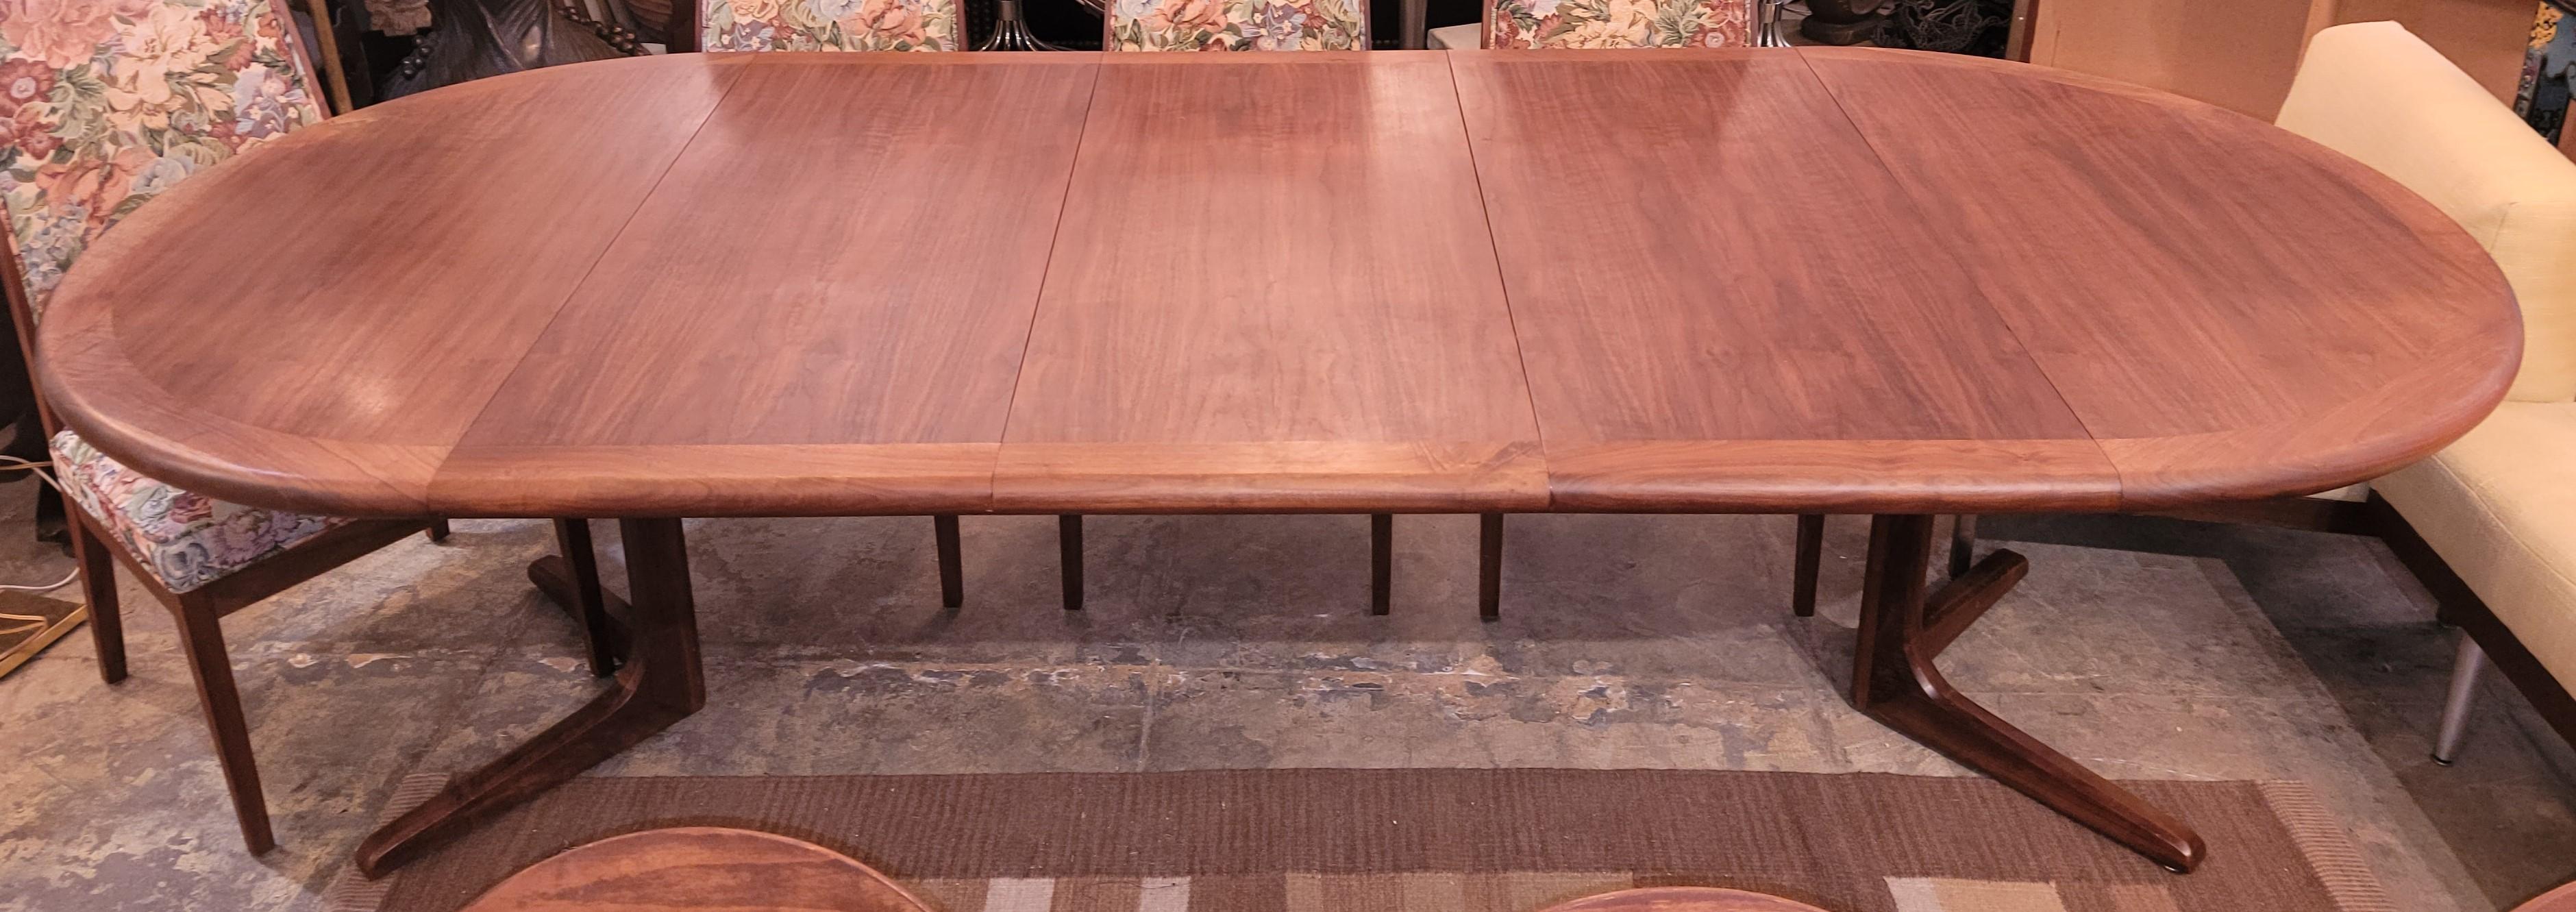 American Mid Century Rosewood Dinning Table By Glen Of California